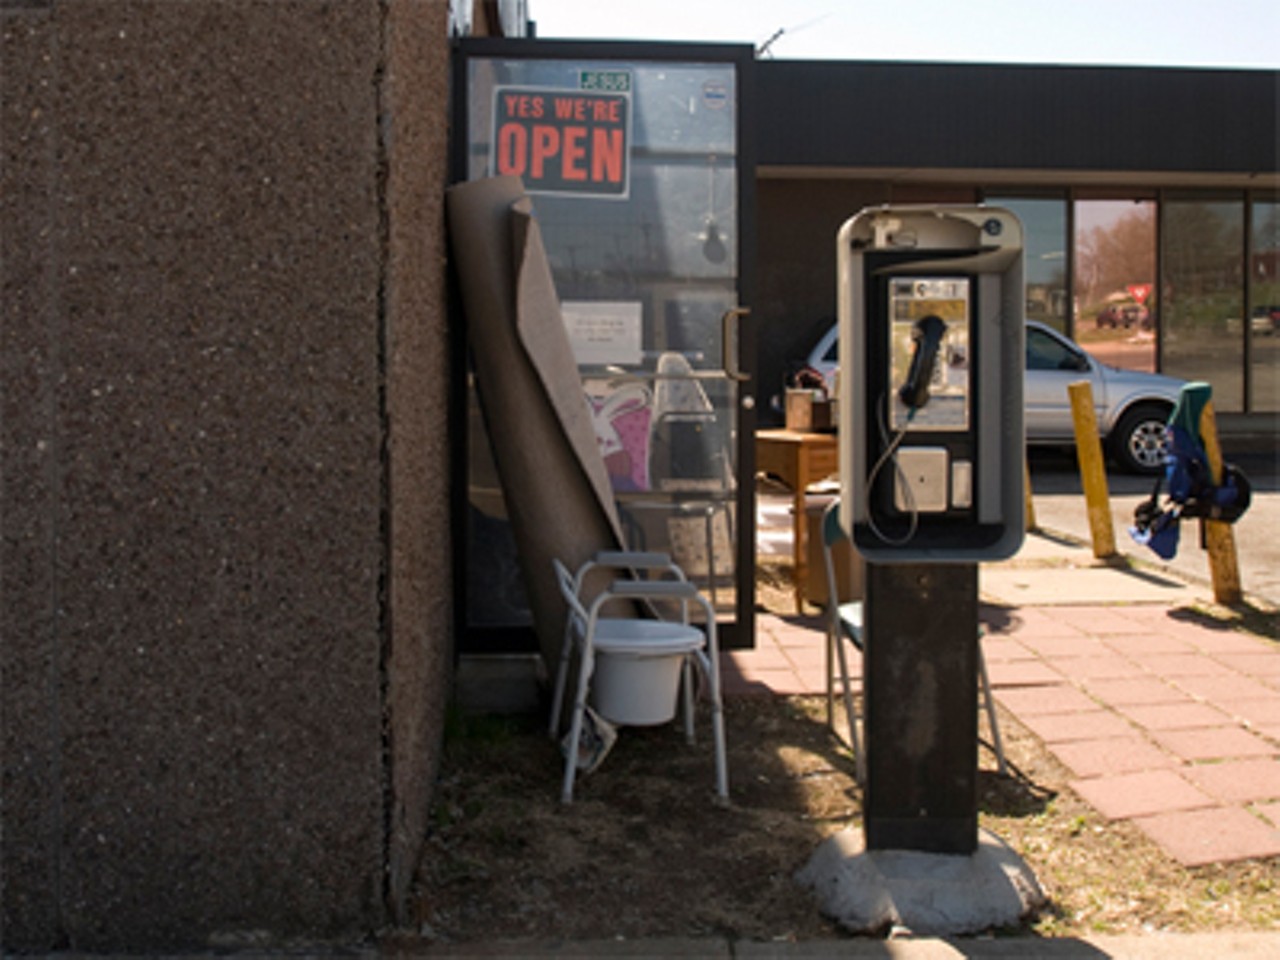 The payphone from which Dawan Ferguson called the ER to say his son, Christian Ferguson, was violently ill. During this phone call, Ferguson said his SUV was stolen with his son Christian in it.
Vanishing Act: Six years after the fact, the disappearance of nine-year-old Christian Ferguson remains a mystery. (March 18, 2009).
Vanishing Act, Part 2: Missing since 2003, little Christian Ferguson is almost surely dead. Police think they've fingered the culprit -- and there's nothing they can do about it. (March 26, 2009).